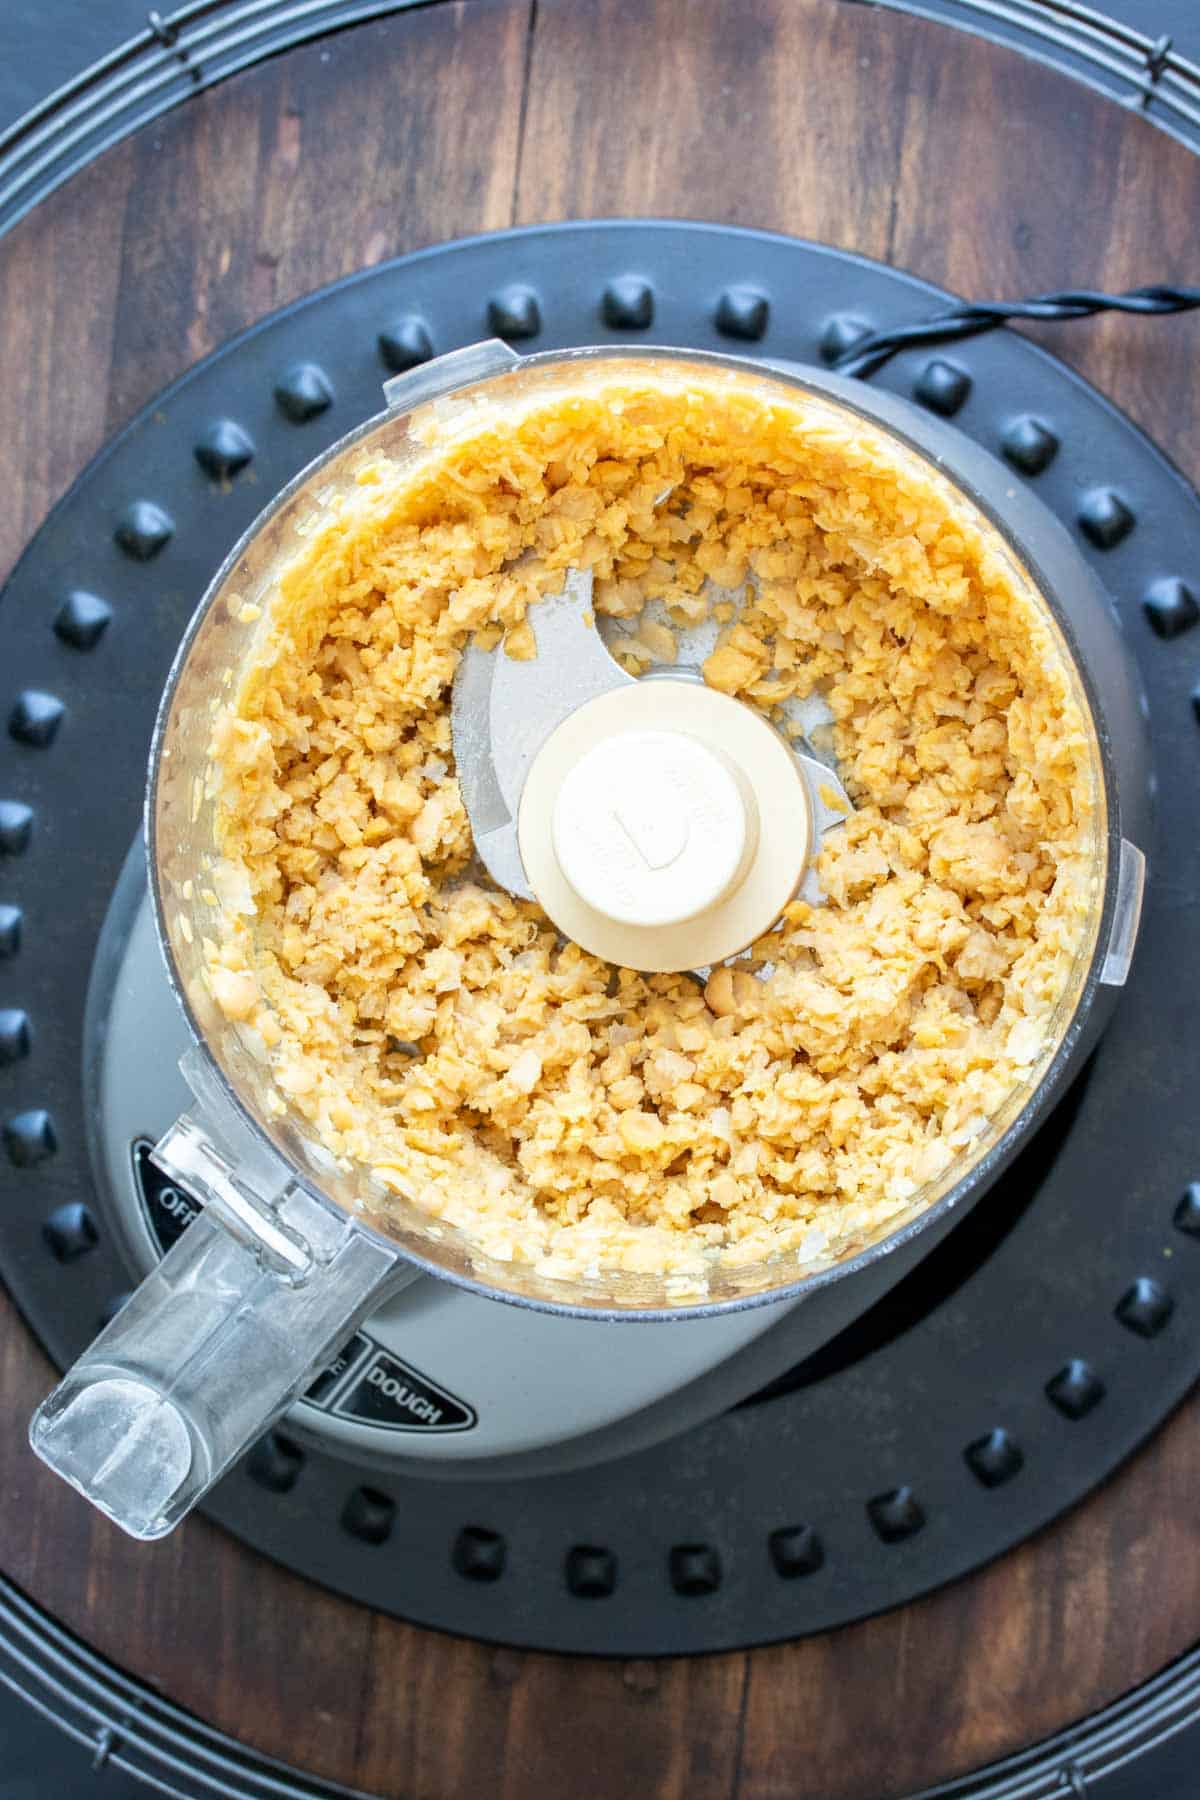 Top view of a food processor with chopped chickpeas in it